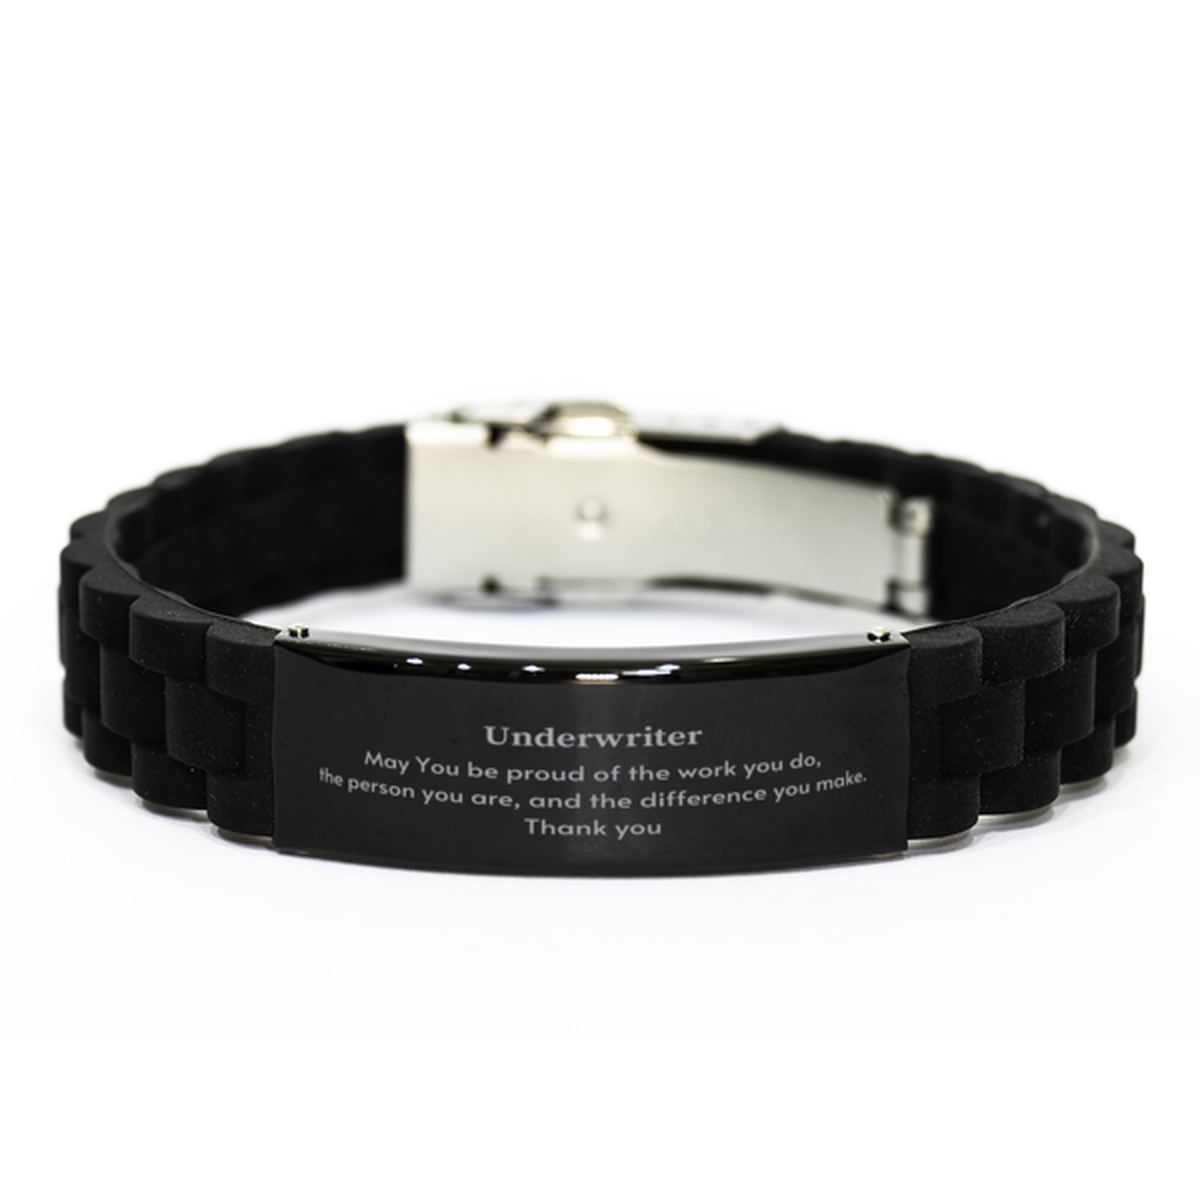 Heartwarming Black Glidelock Clasp Bracelet Retirement Coworkers Gifts for Underwriter, Underwriter May You be proud of the work you do, the person you are Gifts for Boss Men Women Friends